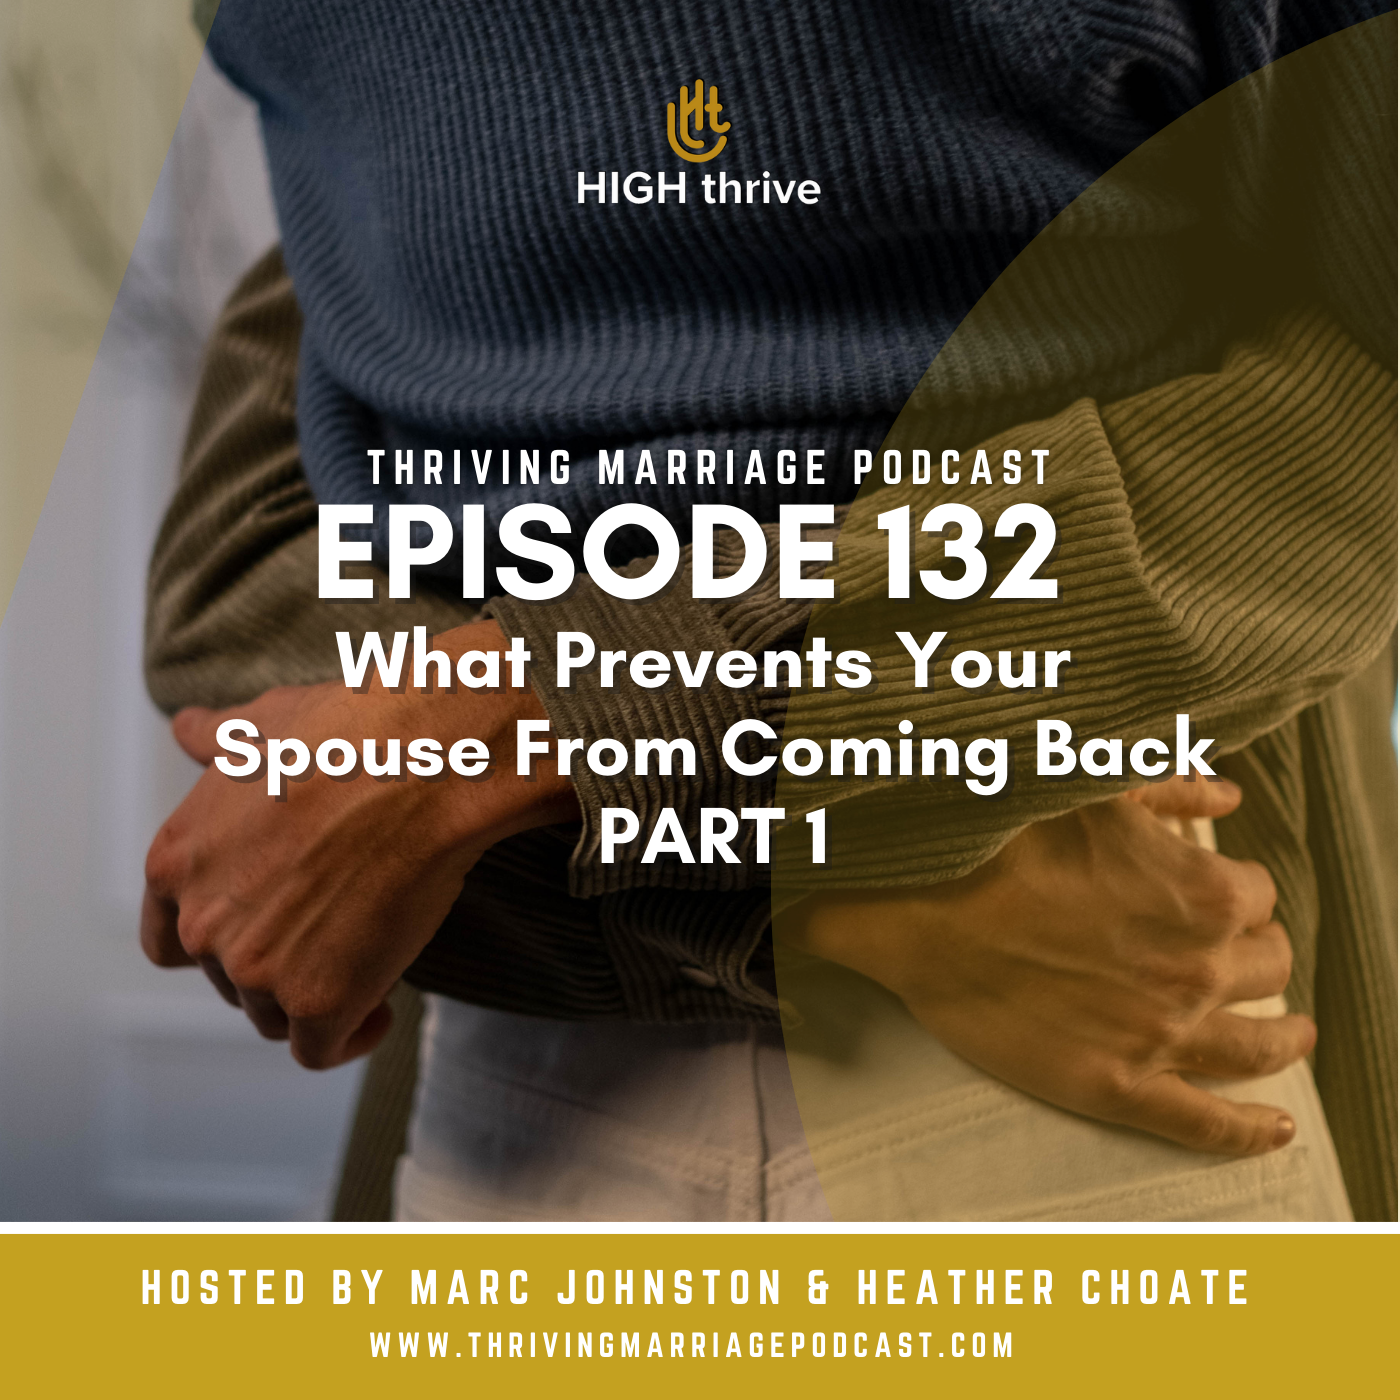 Episode 132: What Prevents Your Spouse From Coming Back [PART 1]